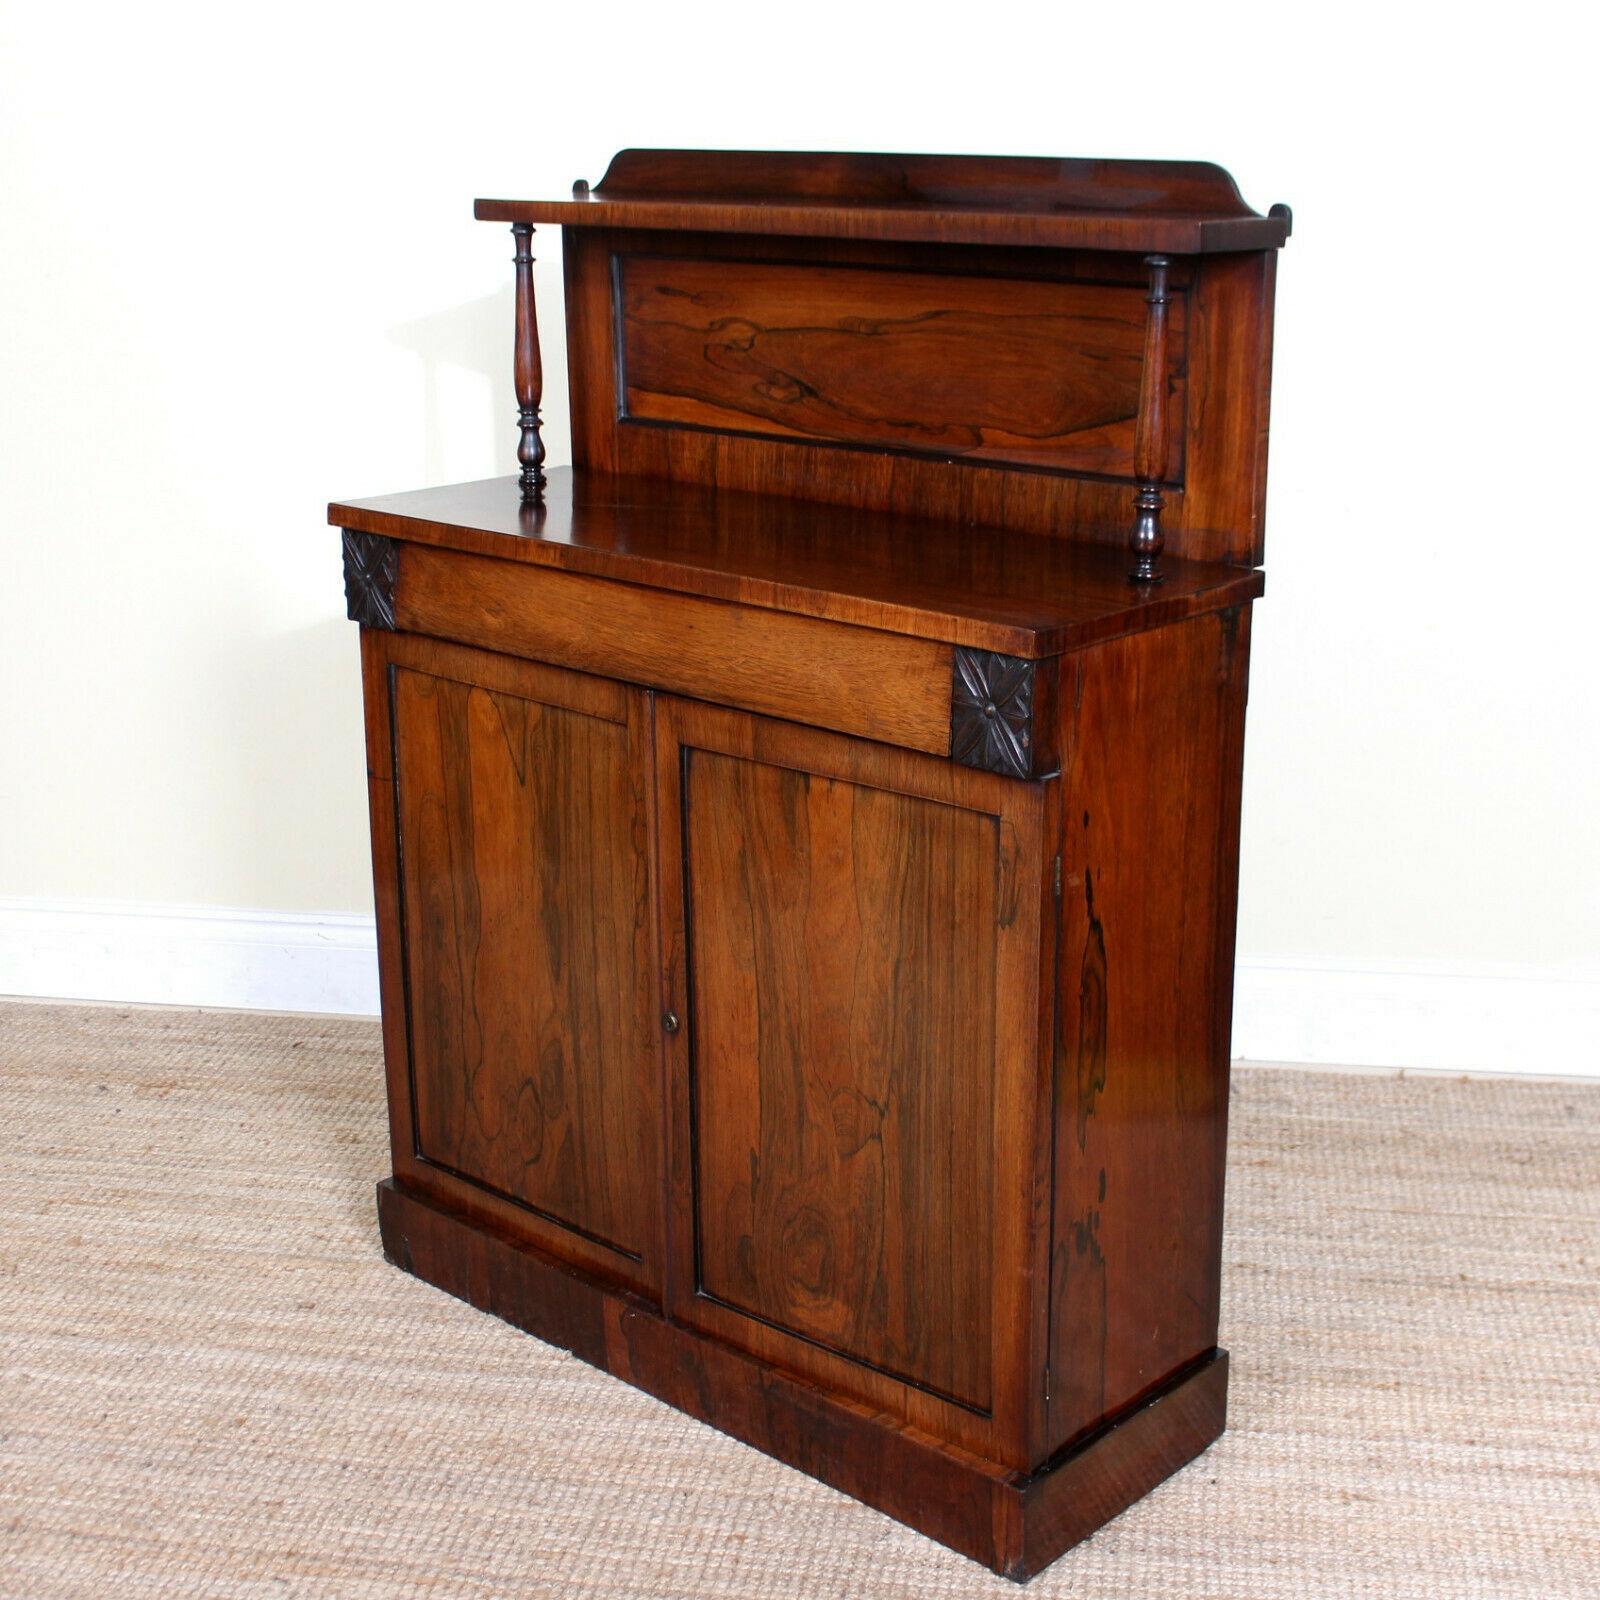 An impressive 19th century petite rosewood chiffonier.
The rosewood Marquetry inlays boasting a well figured grain and rich patina.
The upstand raised on slender turned columns above the main body fitted a long drawer with dovetailed jointing and